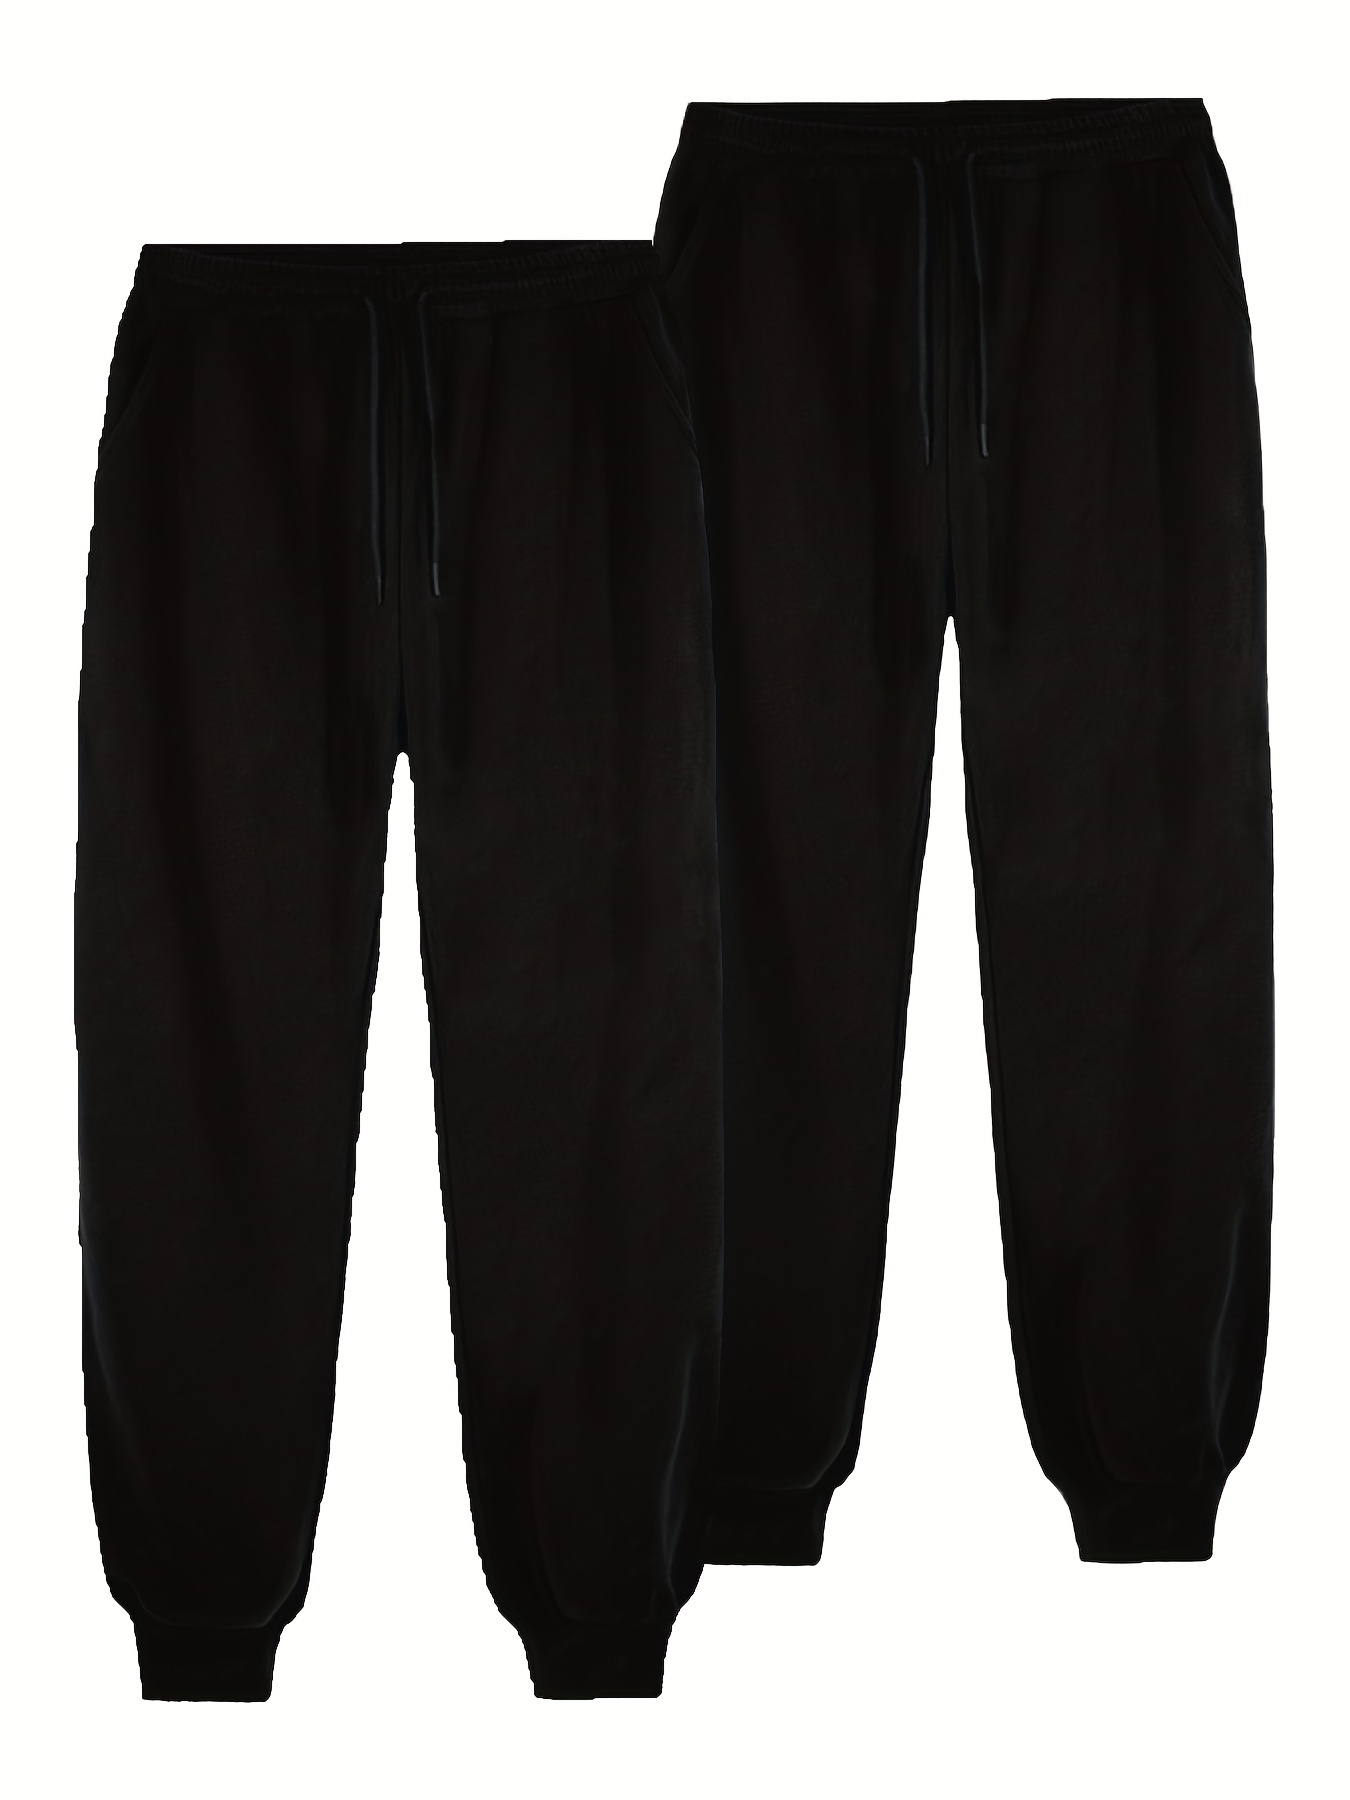 Men's Stylish Graphic Sweatpants: Stretchy, Comfy Joggers Perfect For  Working Out!